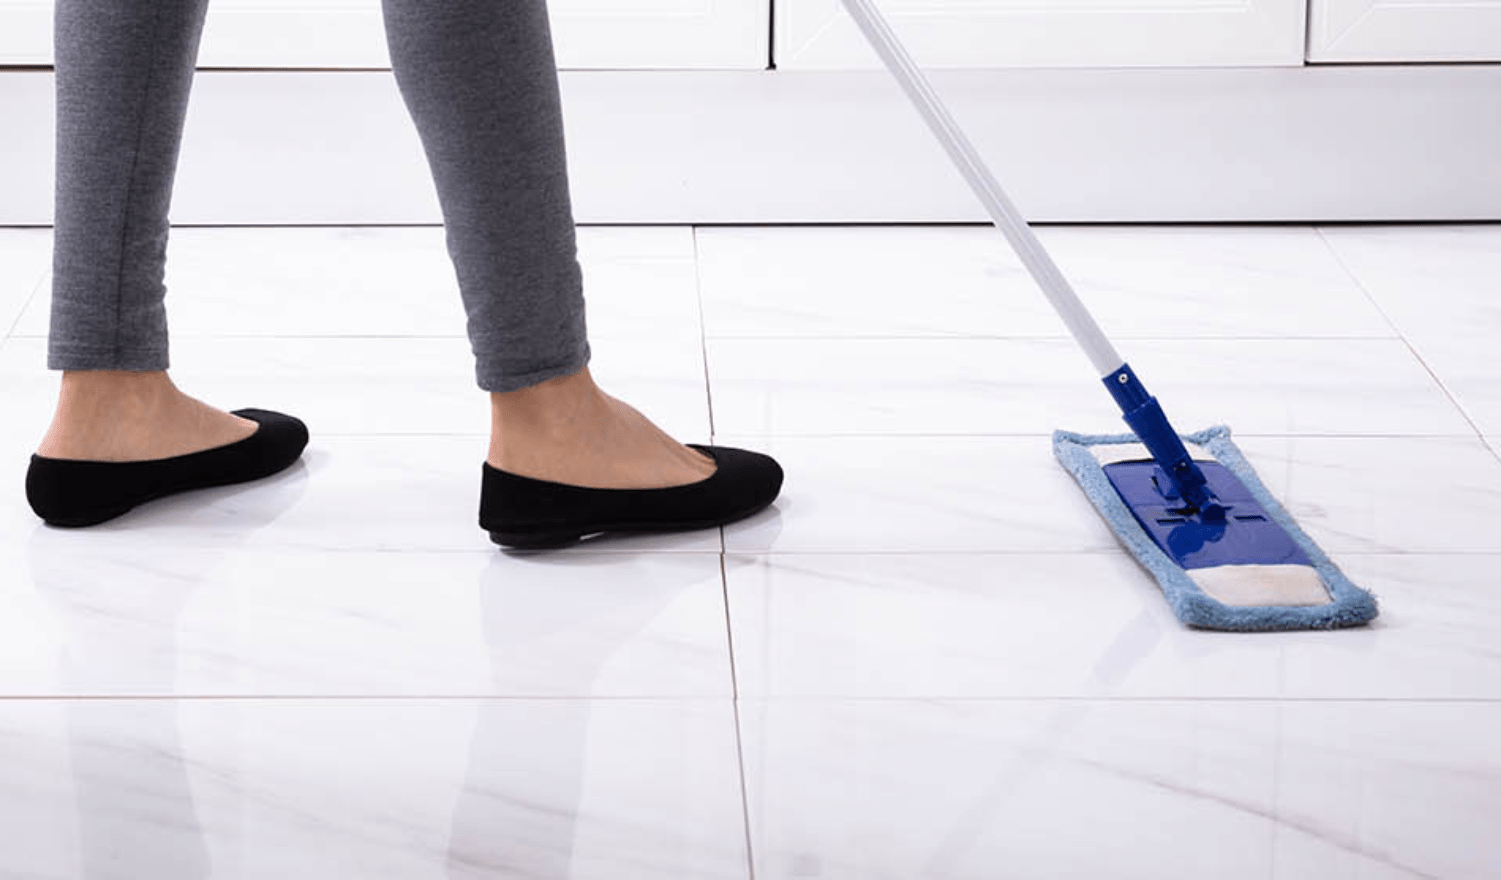 Tile floor cleaning | LeClaire Flooring